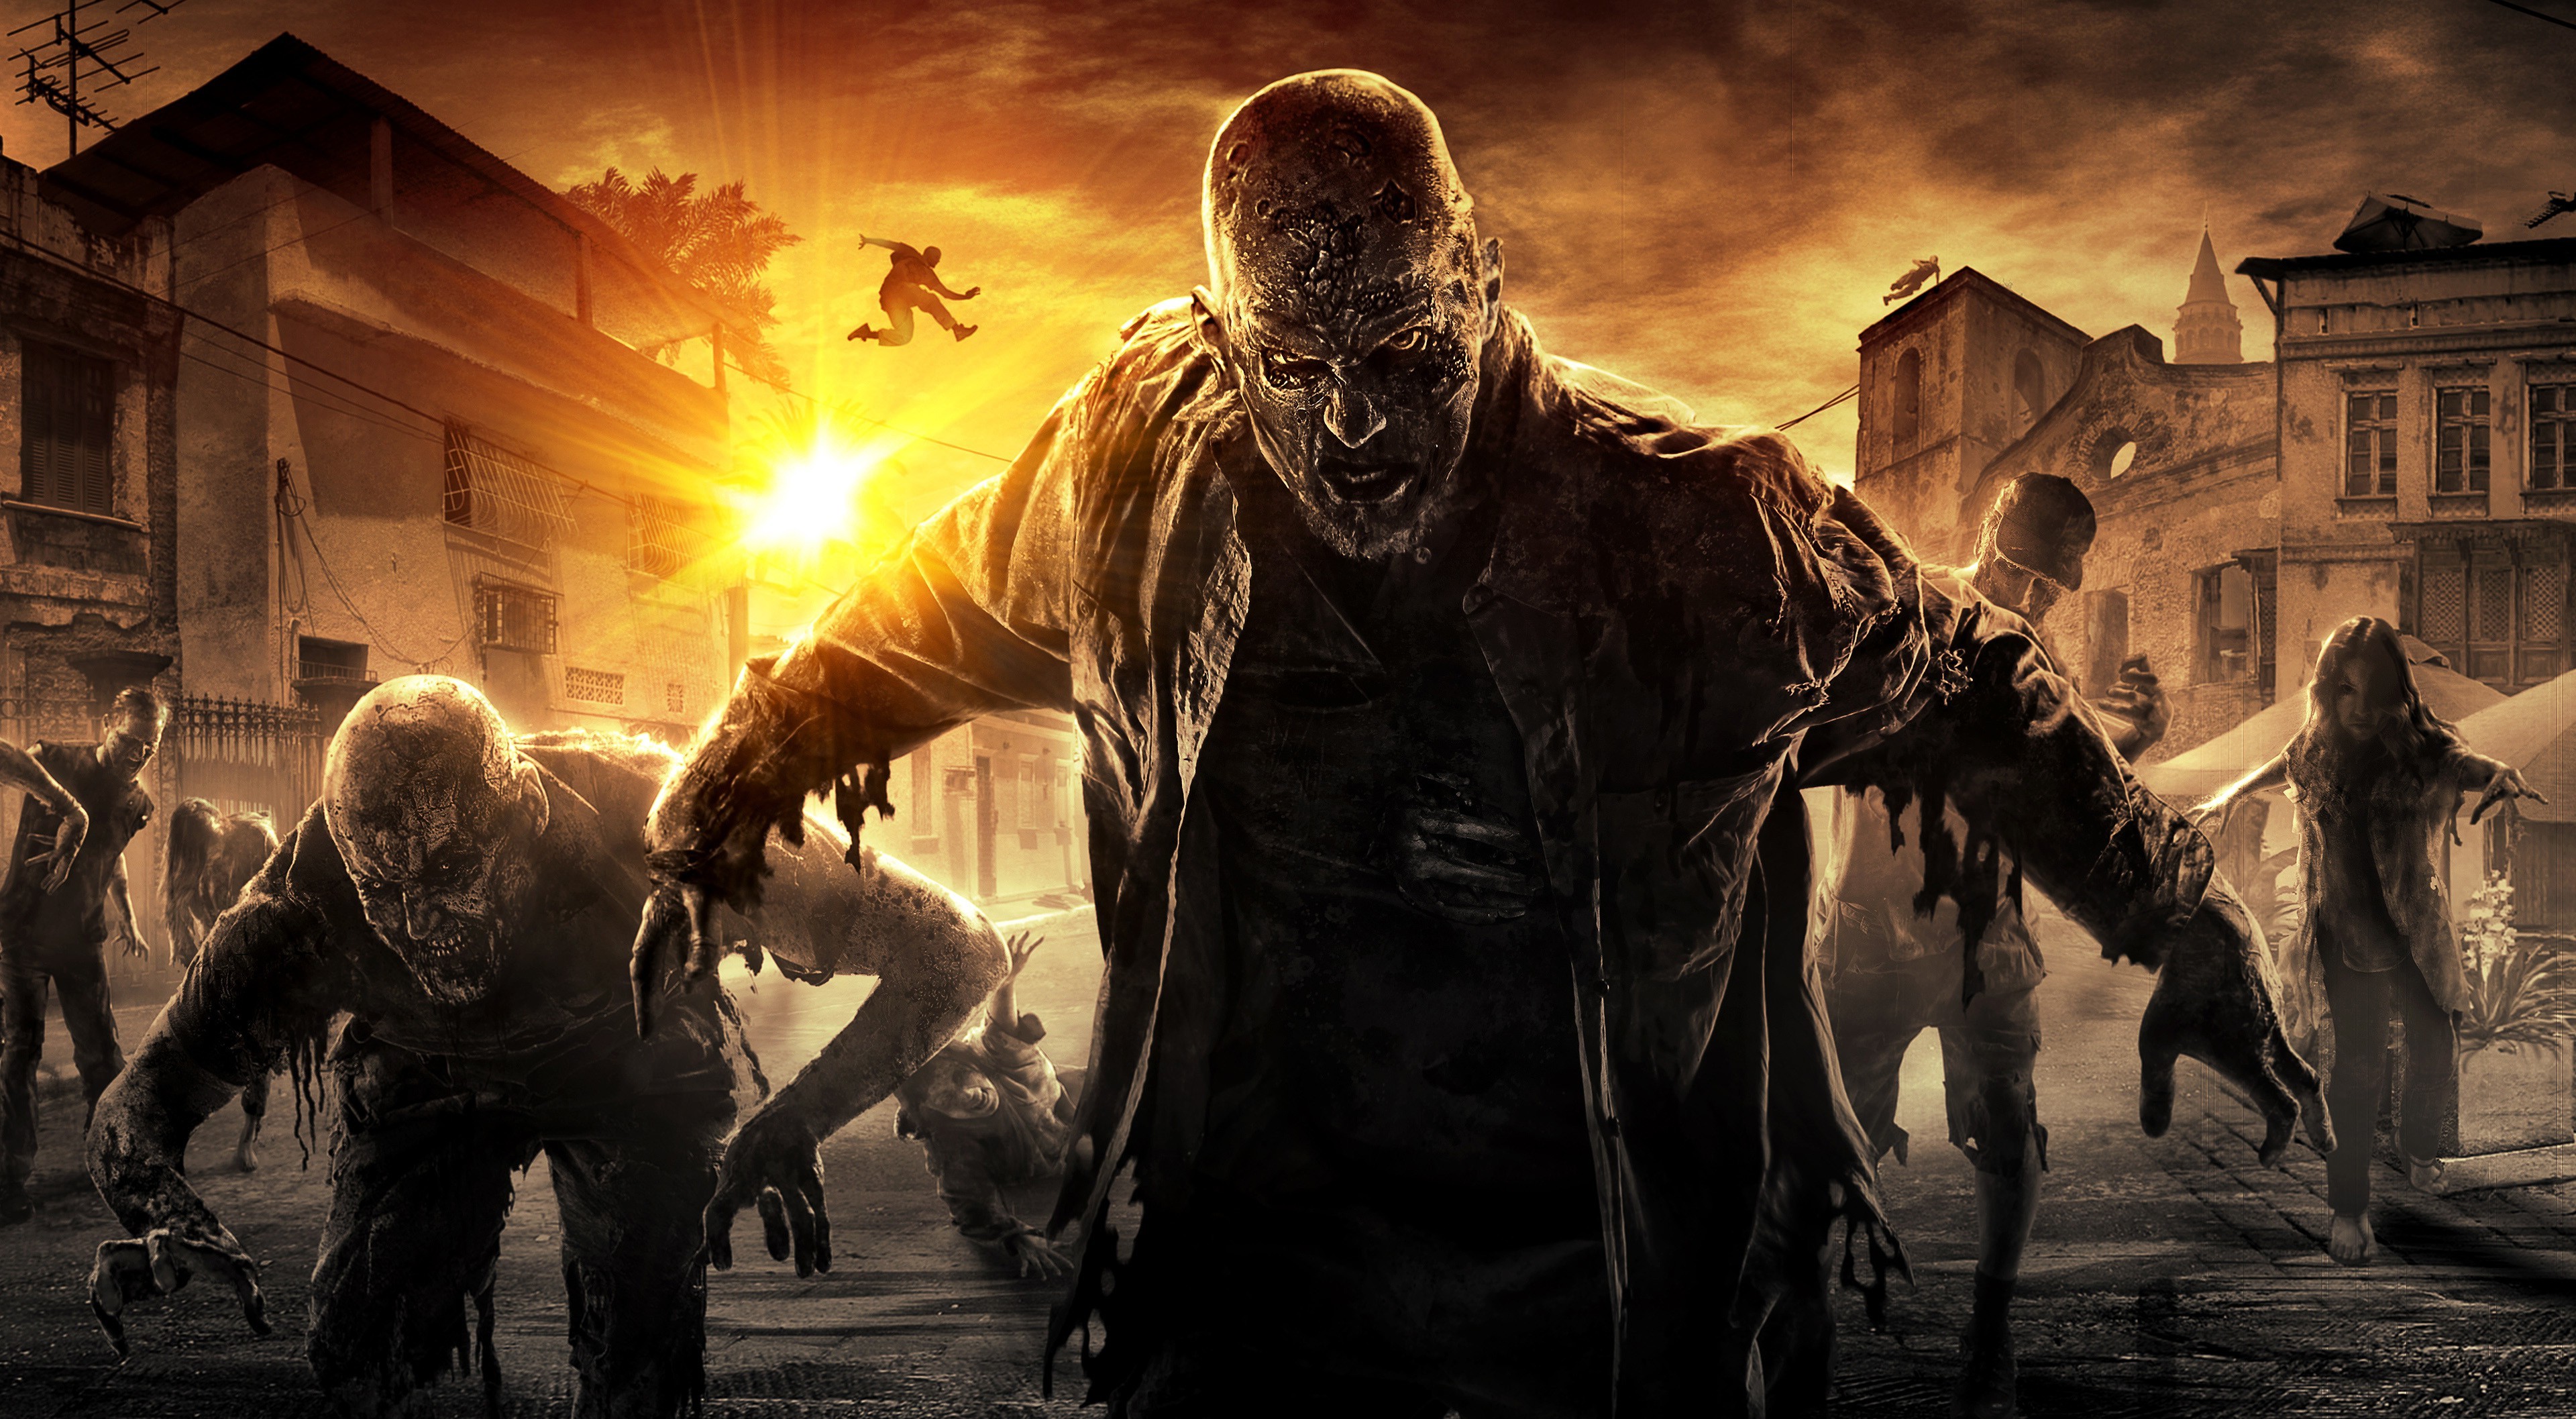 dying light game